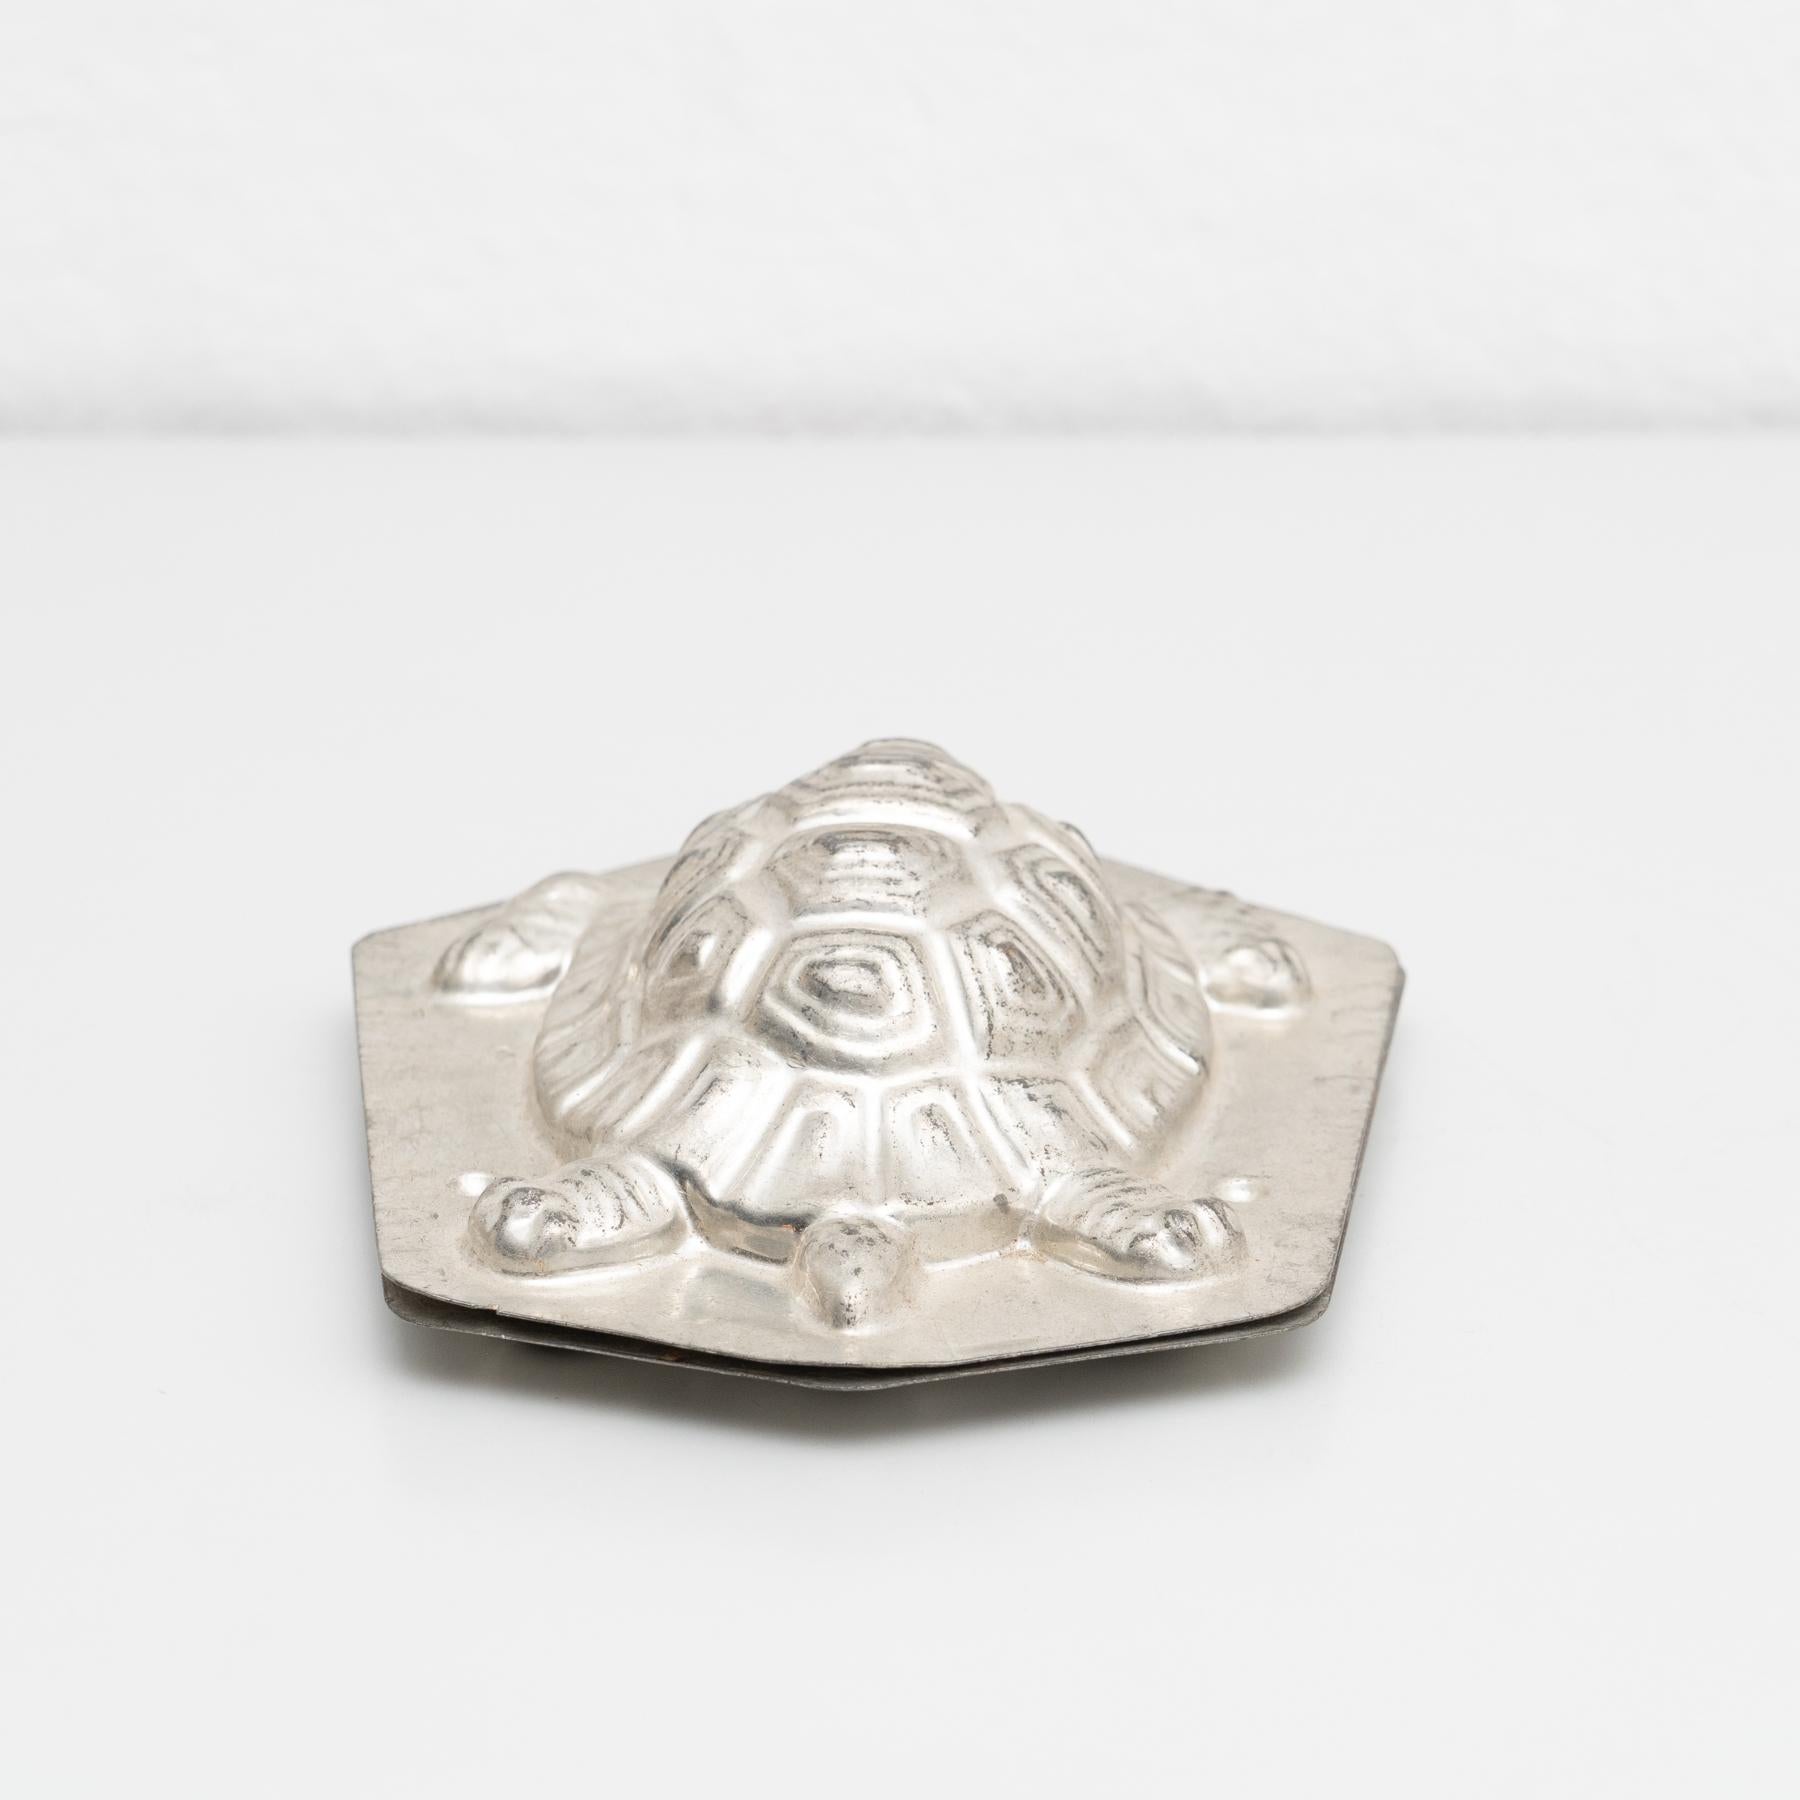 Antique Turtle Shaped Metal Cooking Mold, circa 1950 For Sale 1